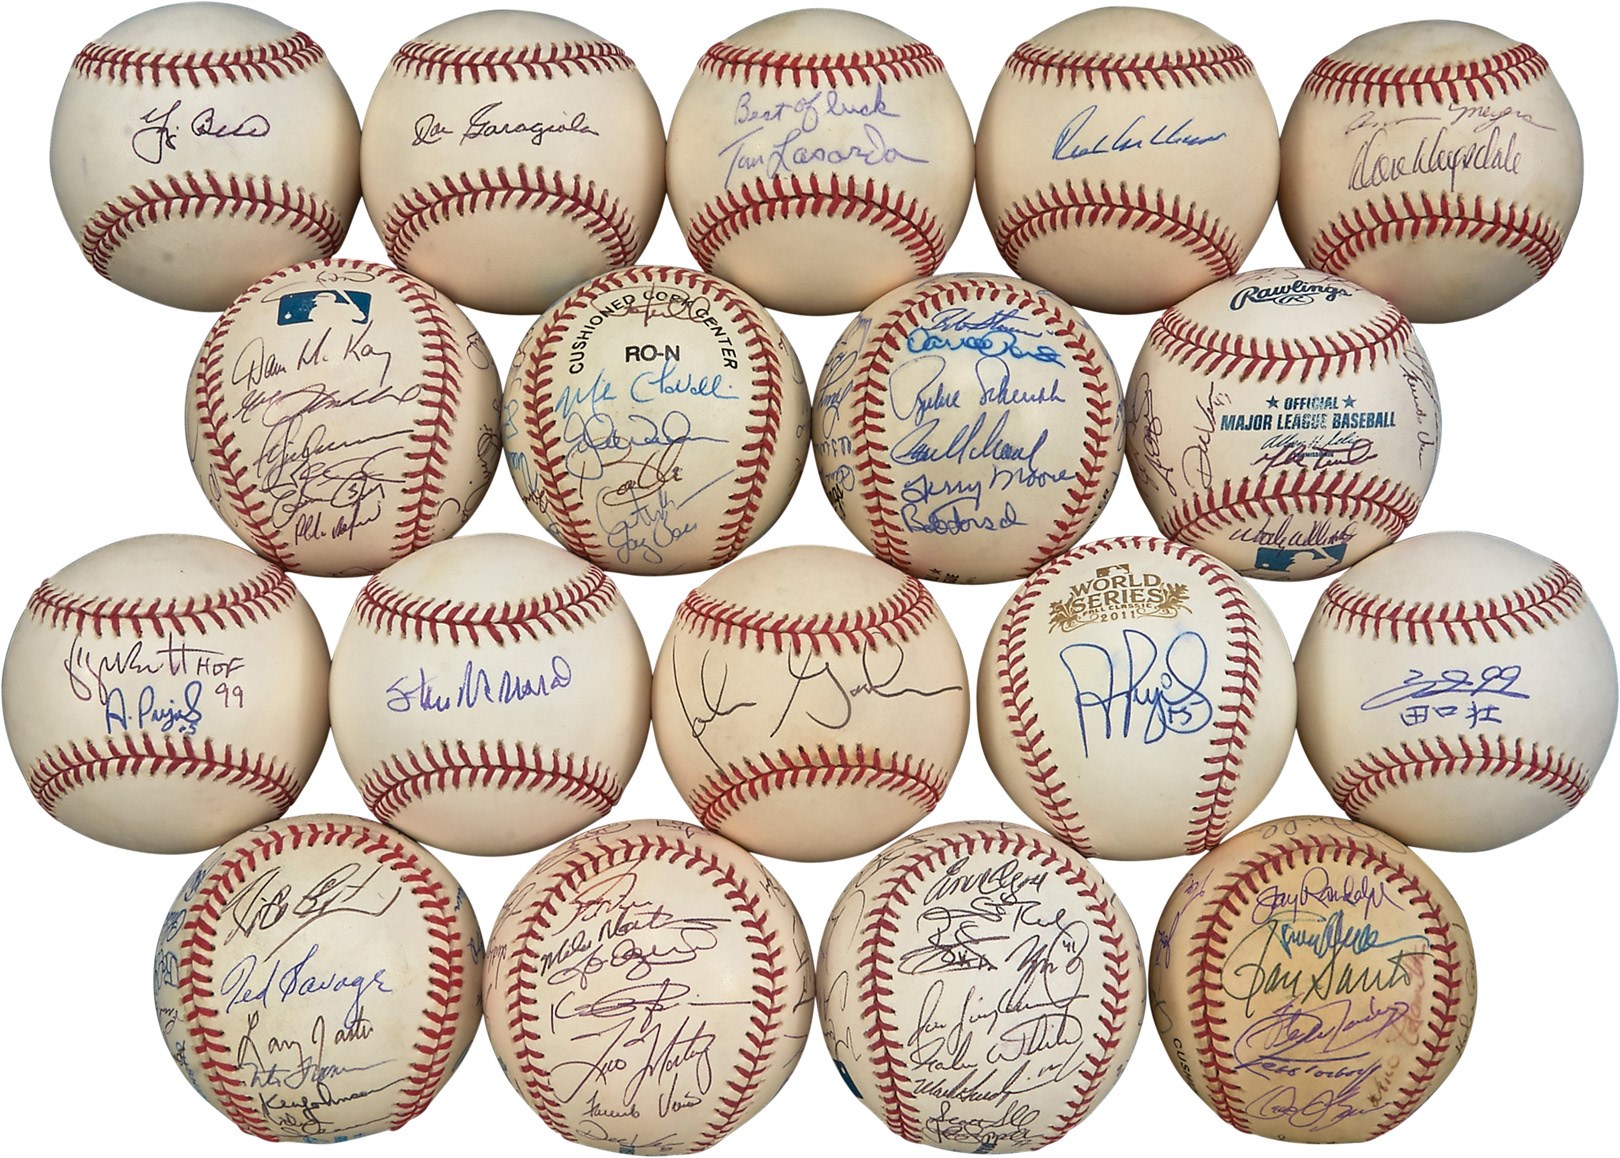 - Large Collection of Single-Signed and Team-Signed Baseballs - Balance of Shannon Collection (260+)